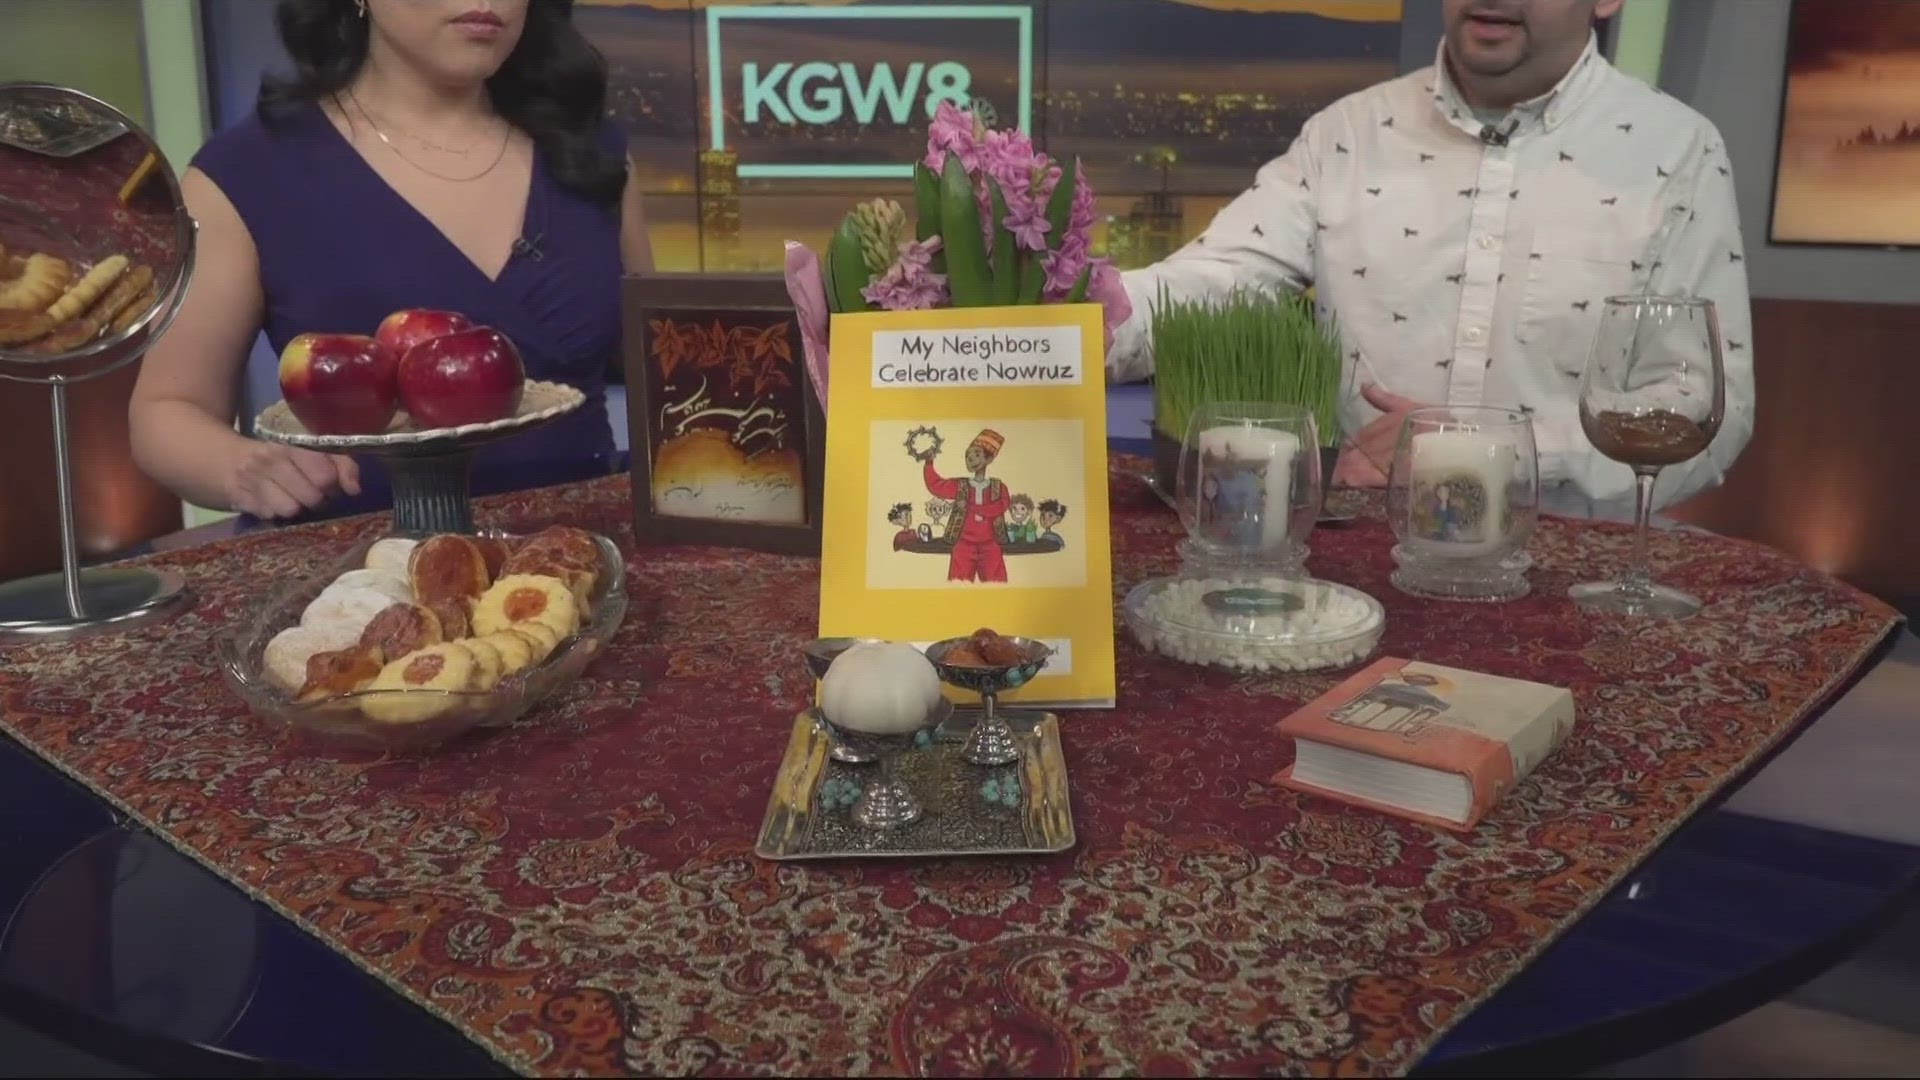 The first day of spring marks the beginning of Persian New Year. Vancouver author Babak Shakeri wrote a children's book dedicated to spreading the message of Nowruz!